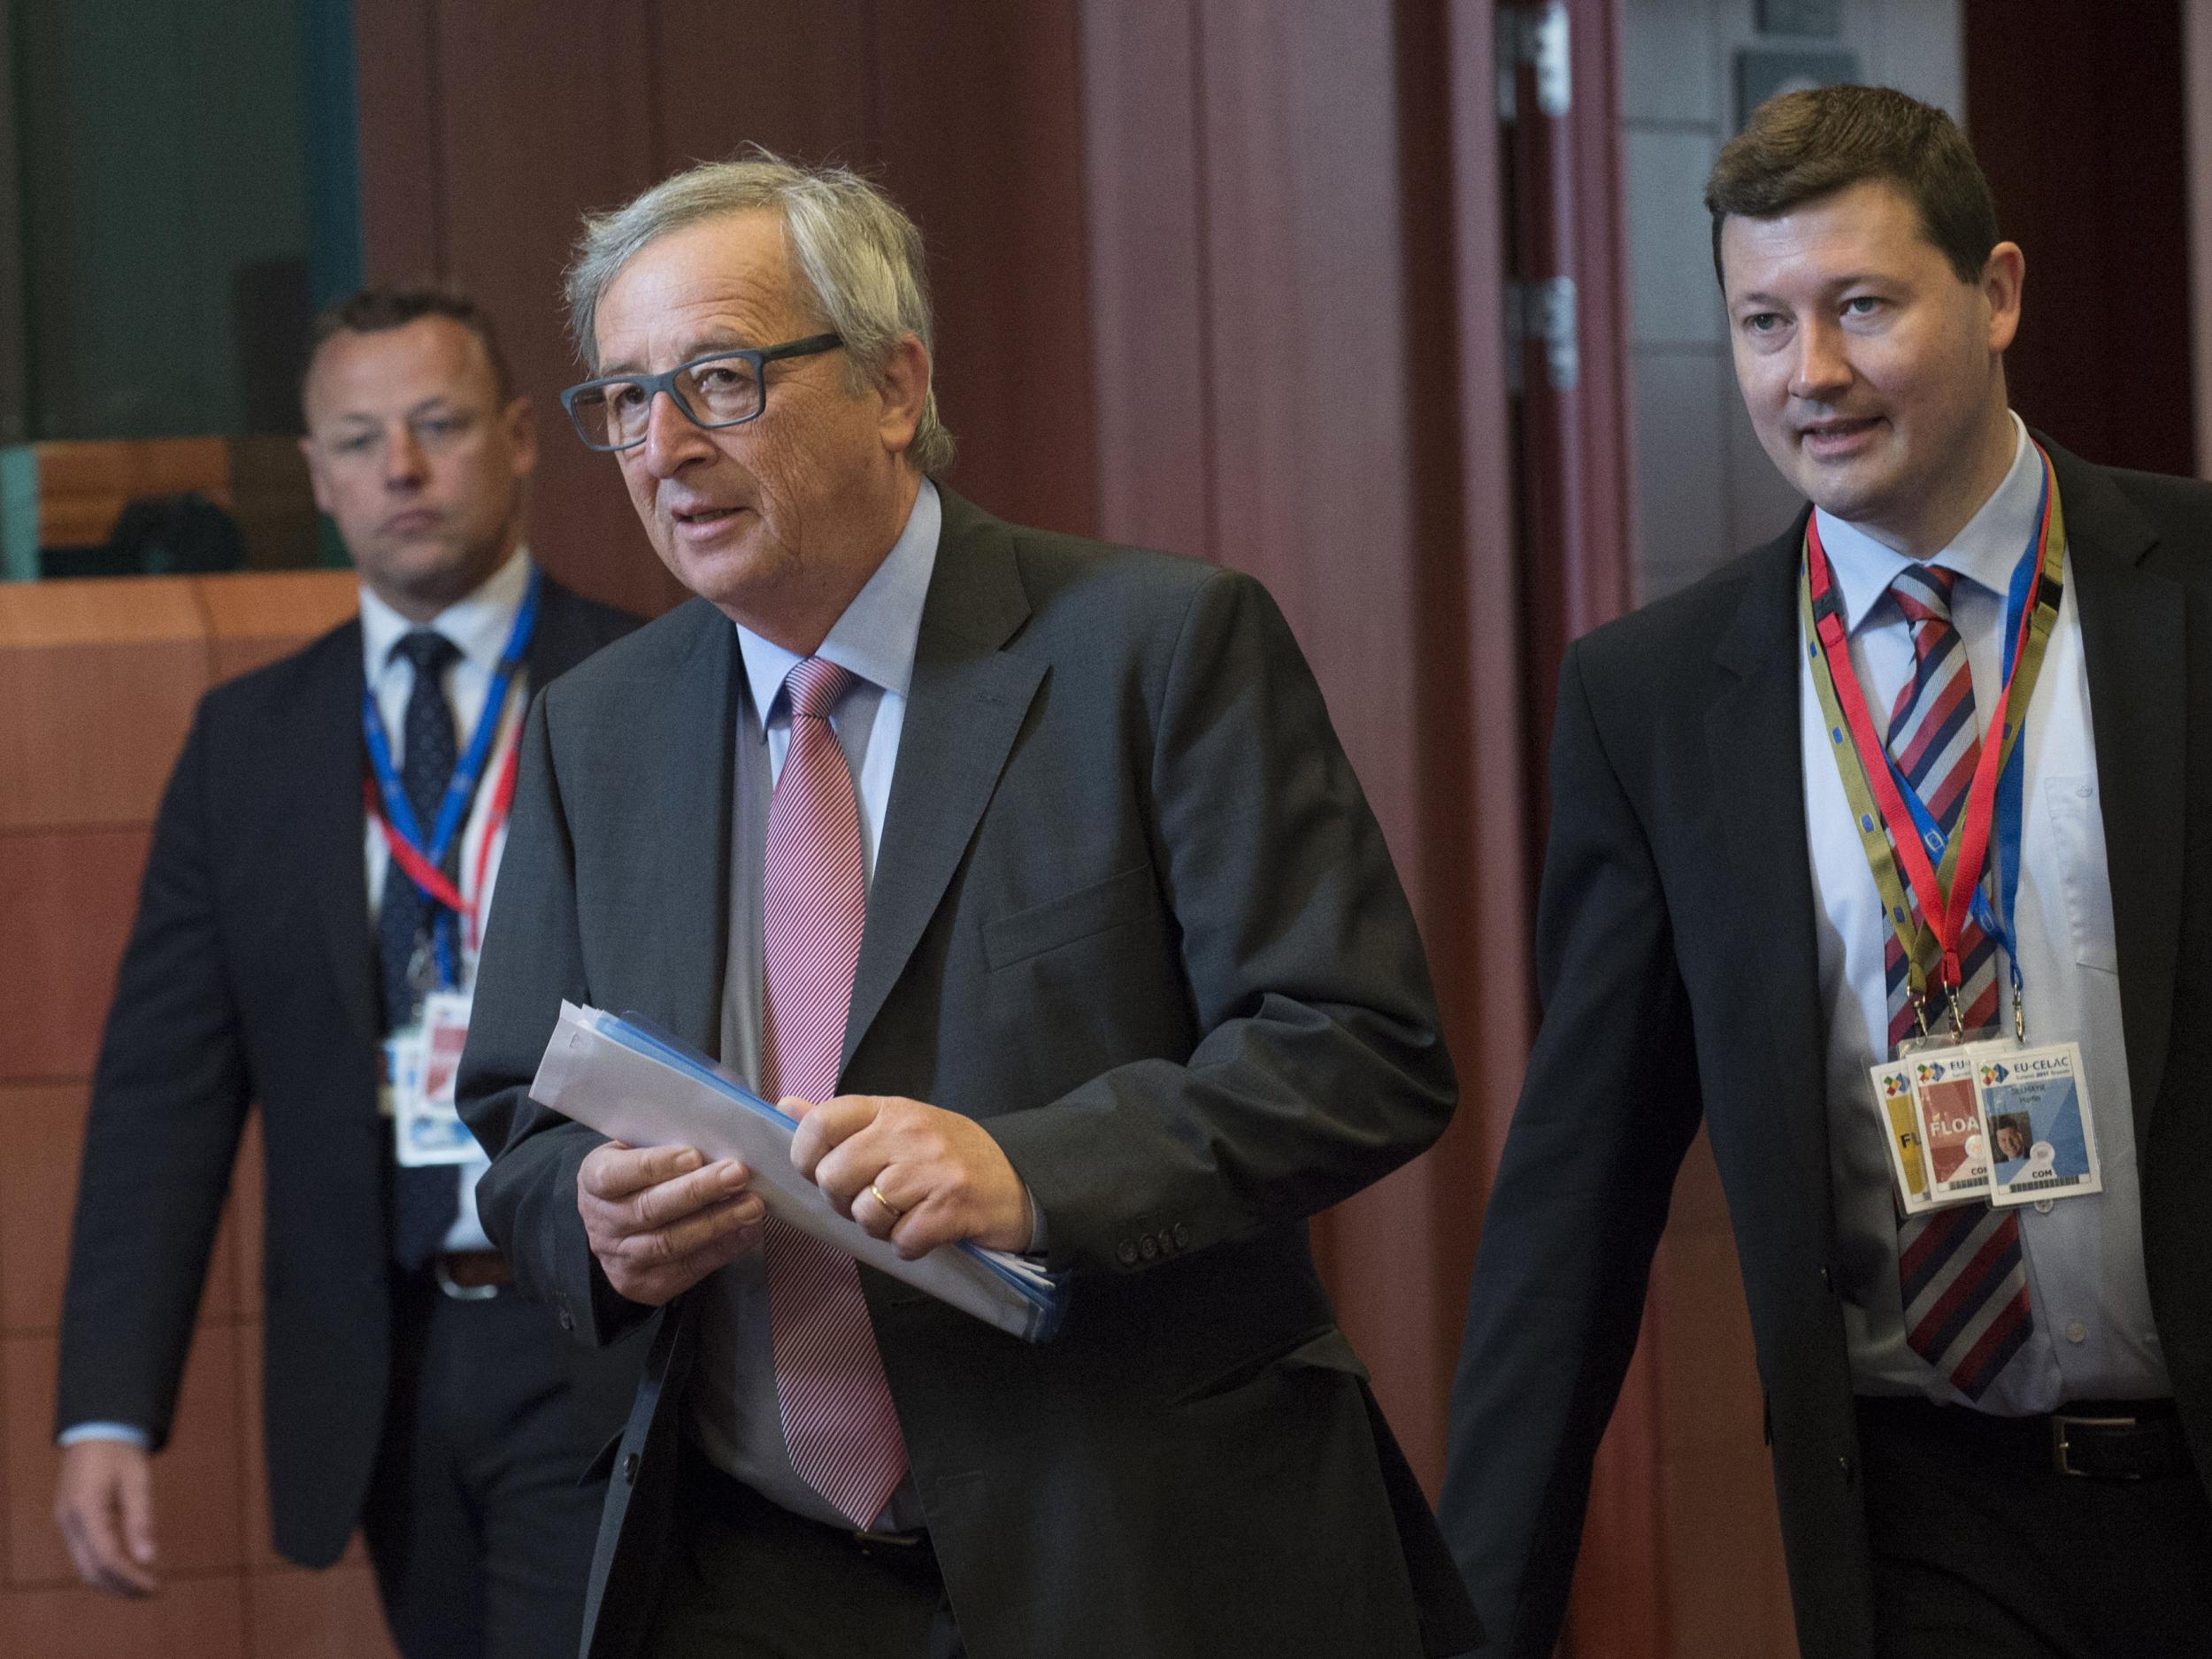 The comments were made by the chief of staff to European Commission President Jean-Claude Juncker